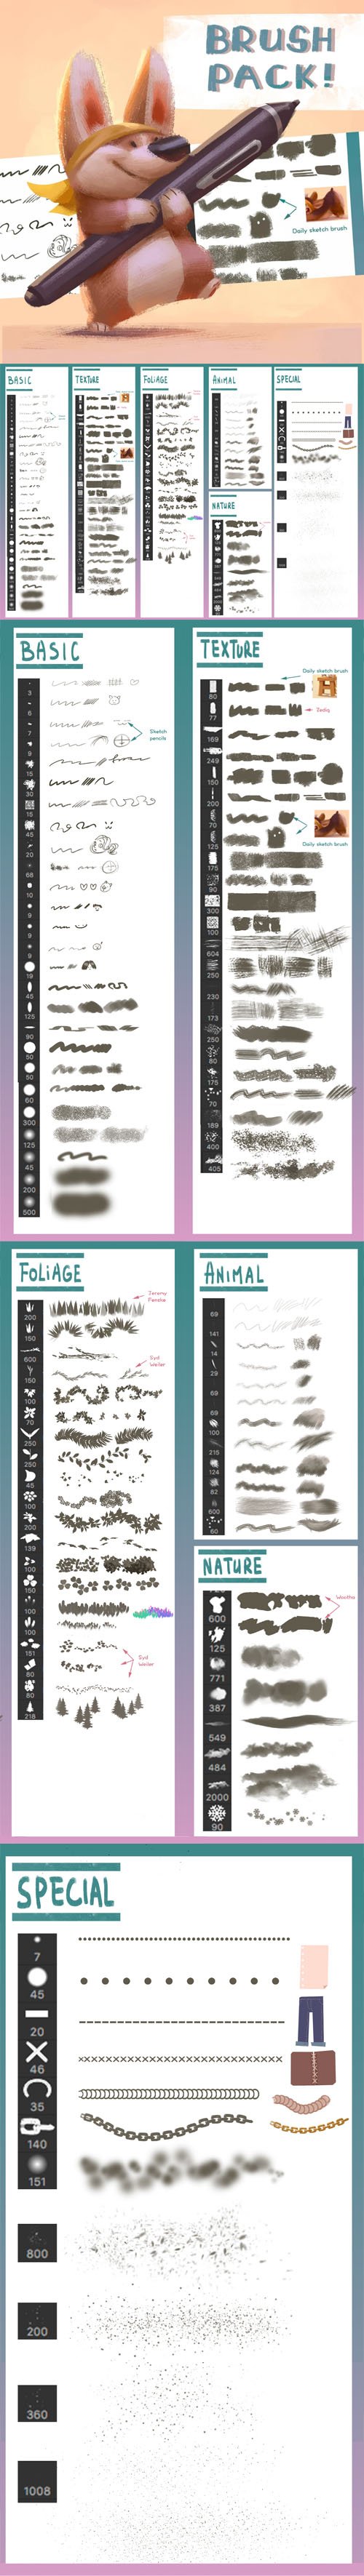 100+ Sketch Brushes for Photoshop